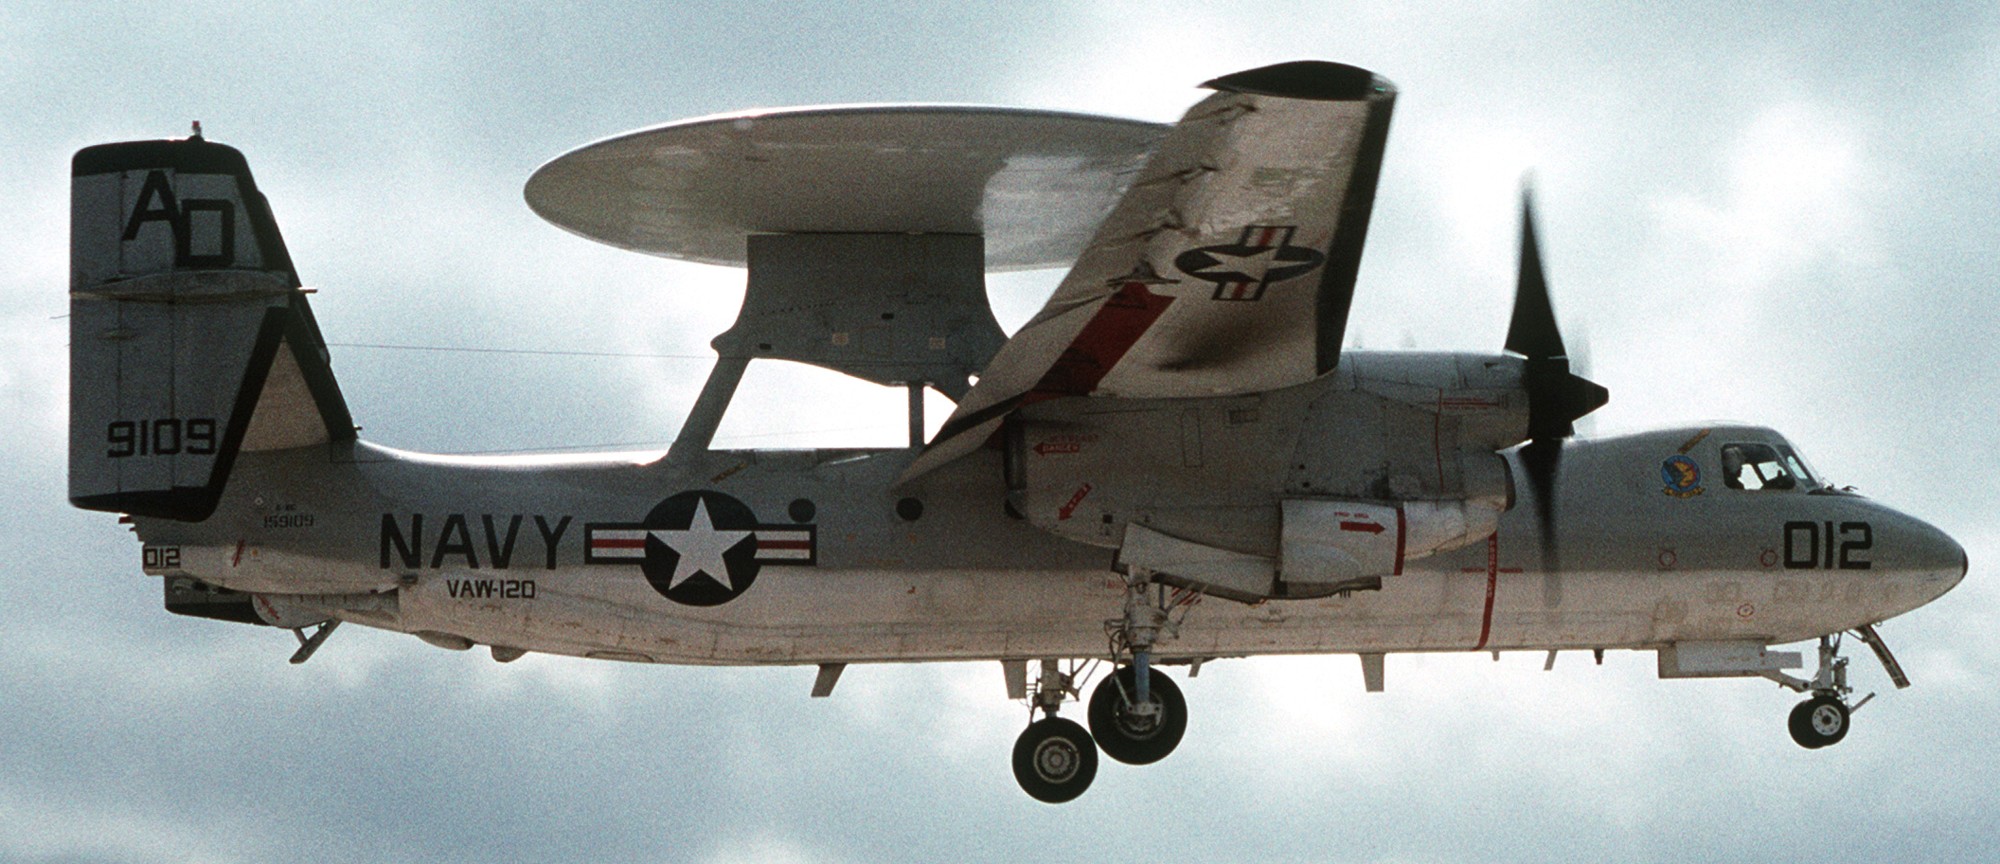 vaw-120 greyhawks carrier airborne early warning squadron e-2c hawkeye replacement nas norfolk virginia 119